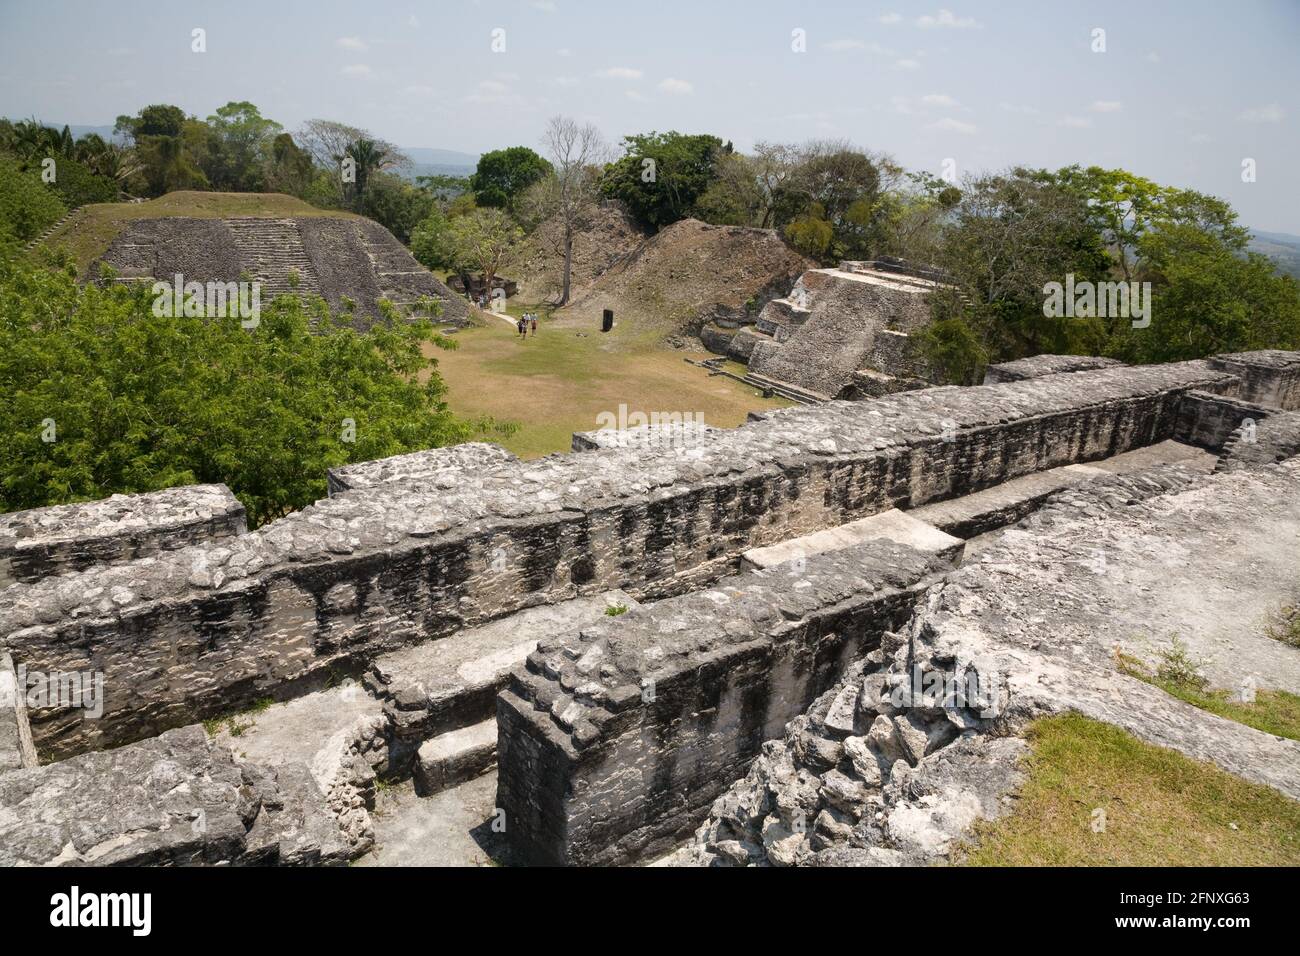 The Mayan ruins of Xunantunich, The Stone Maiden, or Lady of the Rocks, named after an apparition of a woman who has appeared at the site, located in Stock Photo